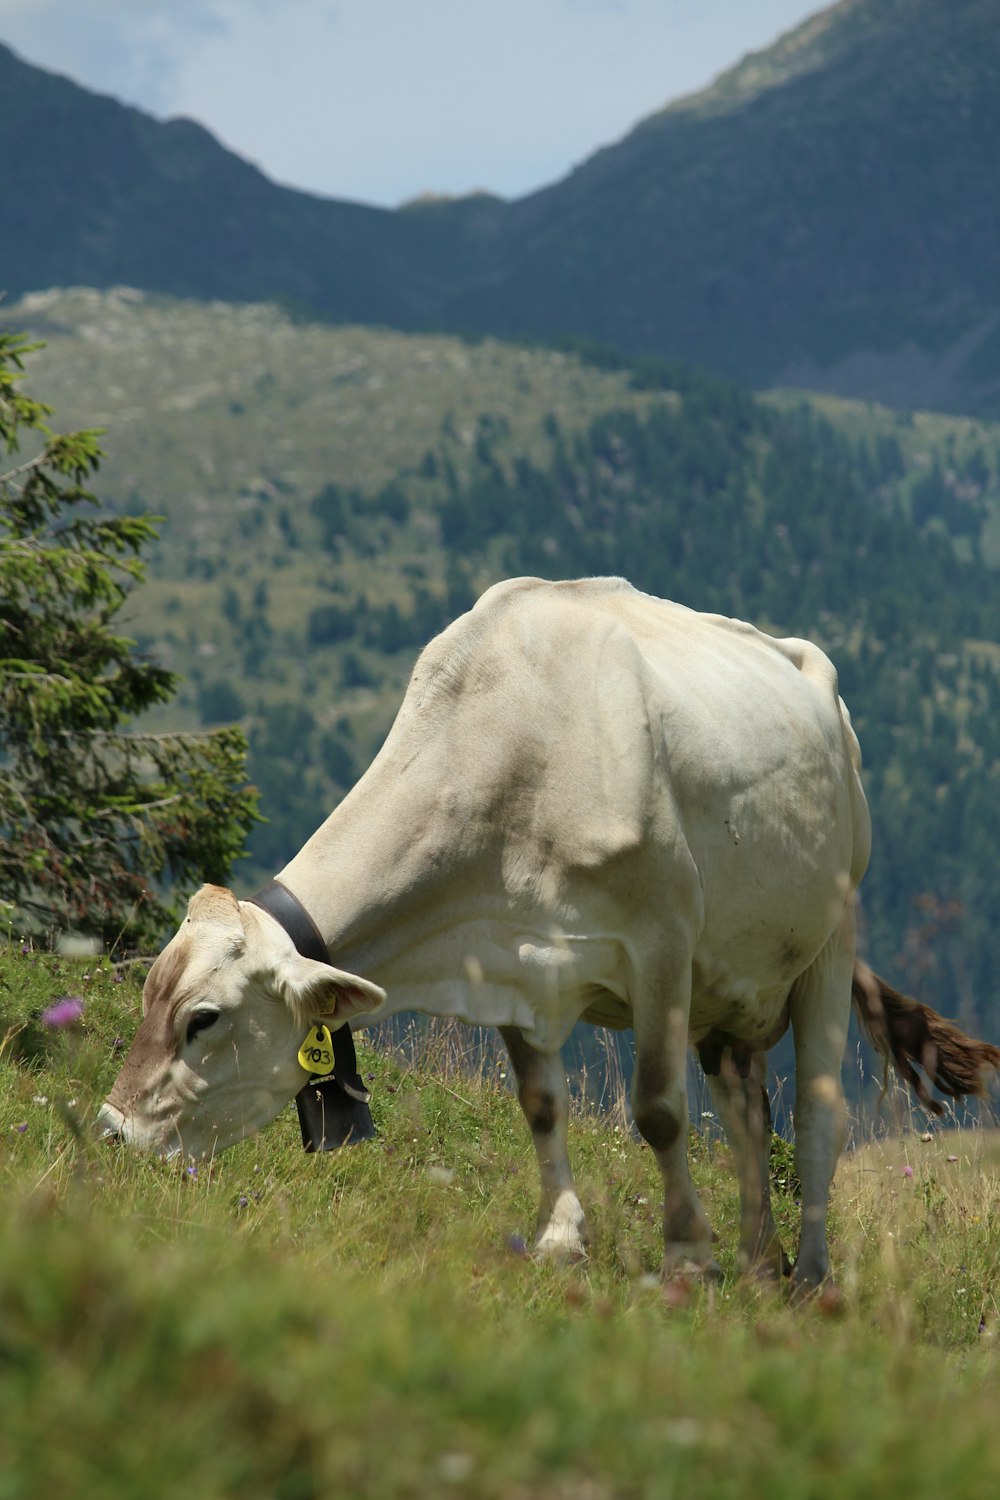 a cow grazing in a field with mountains in the background